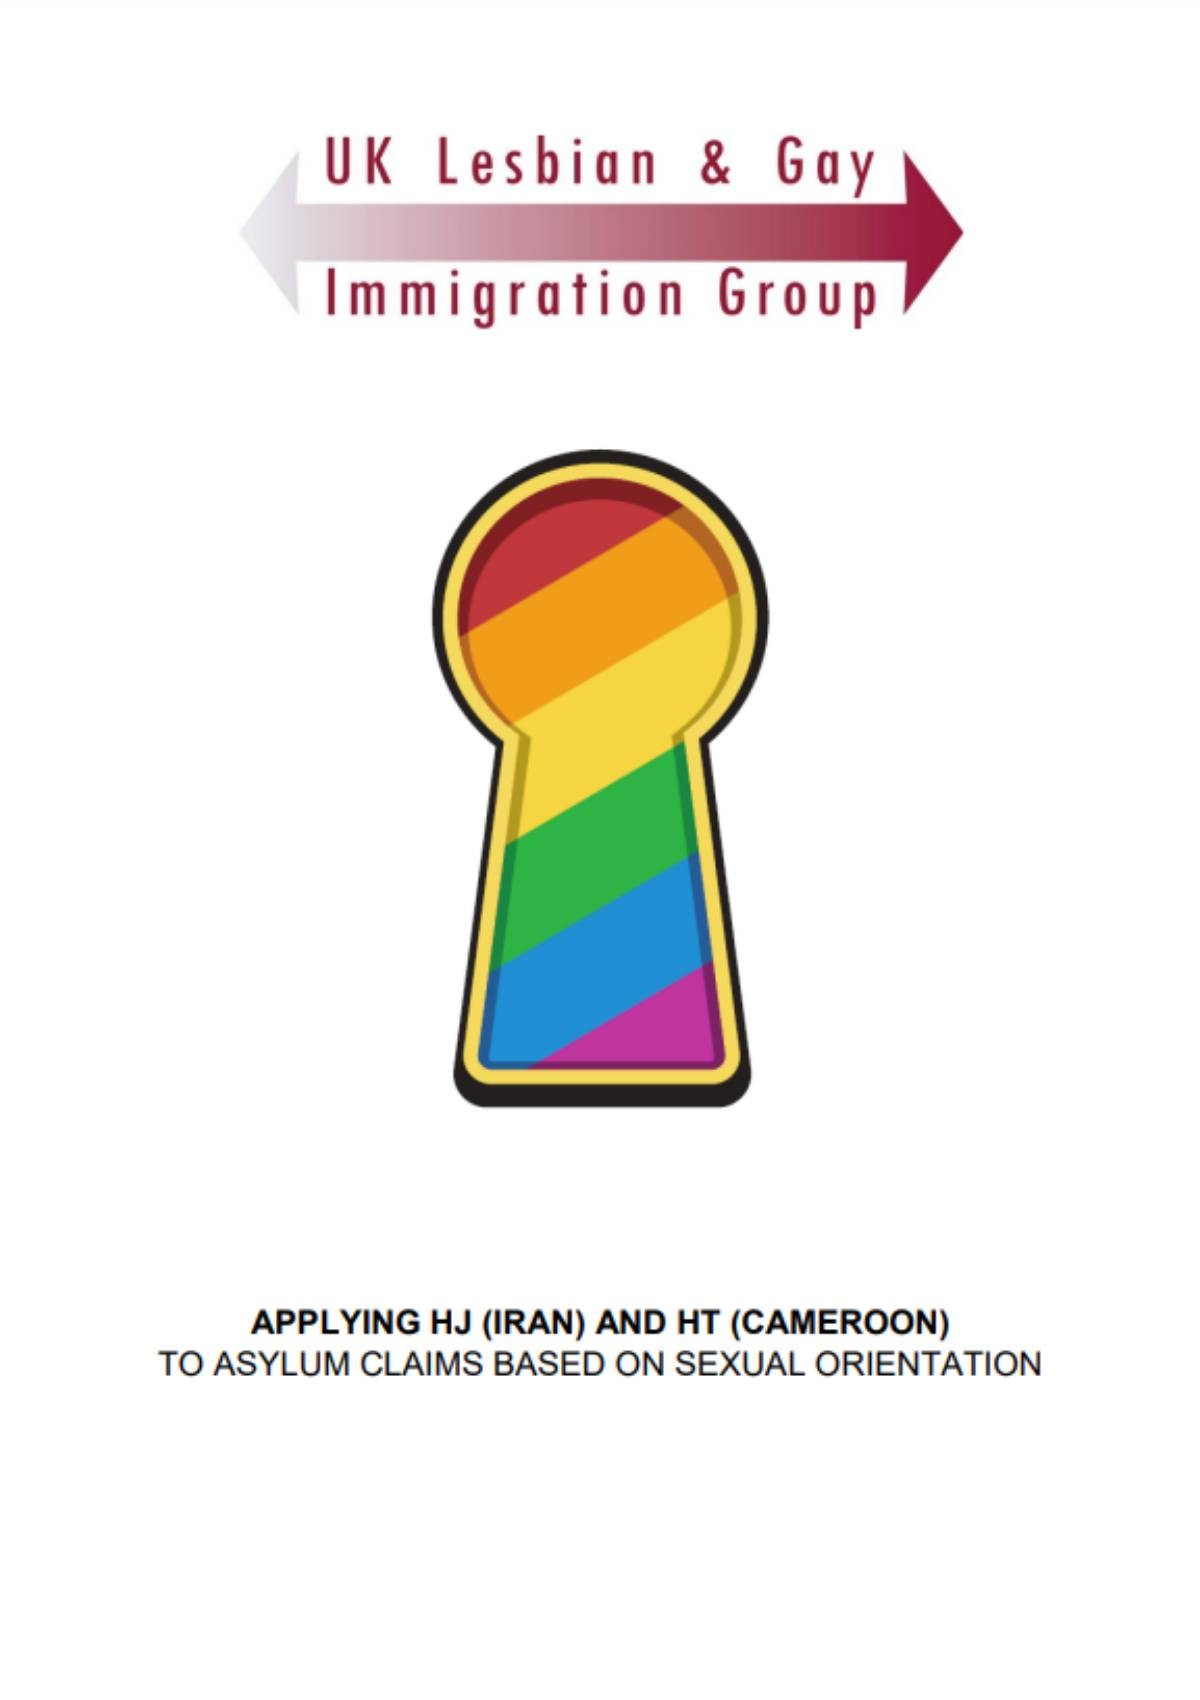 Uk lesbian gay immigration group application form.